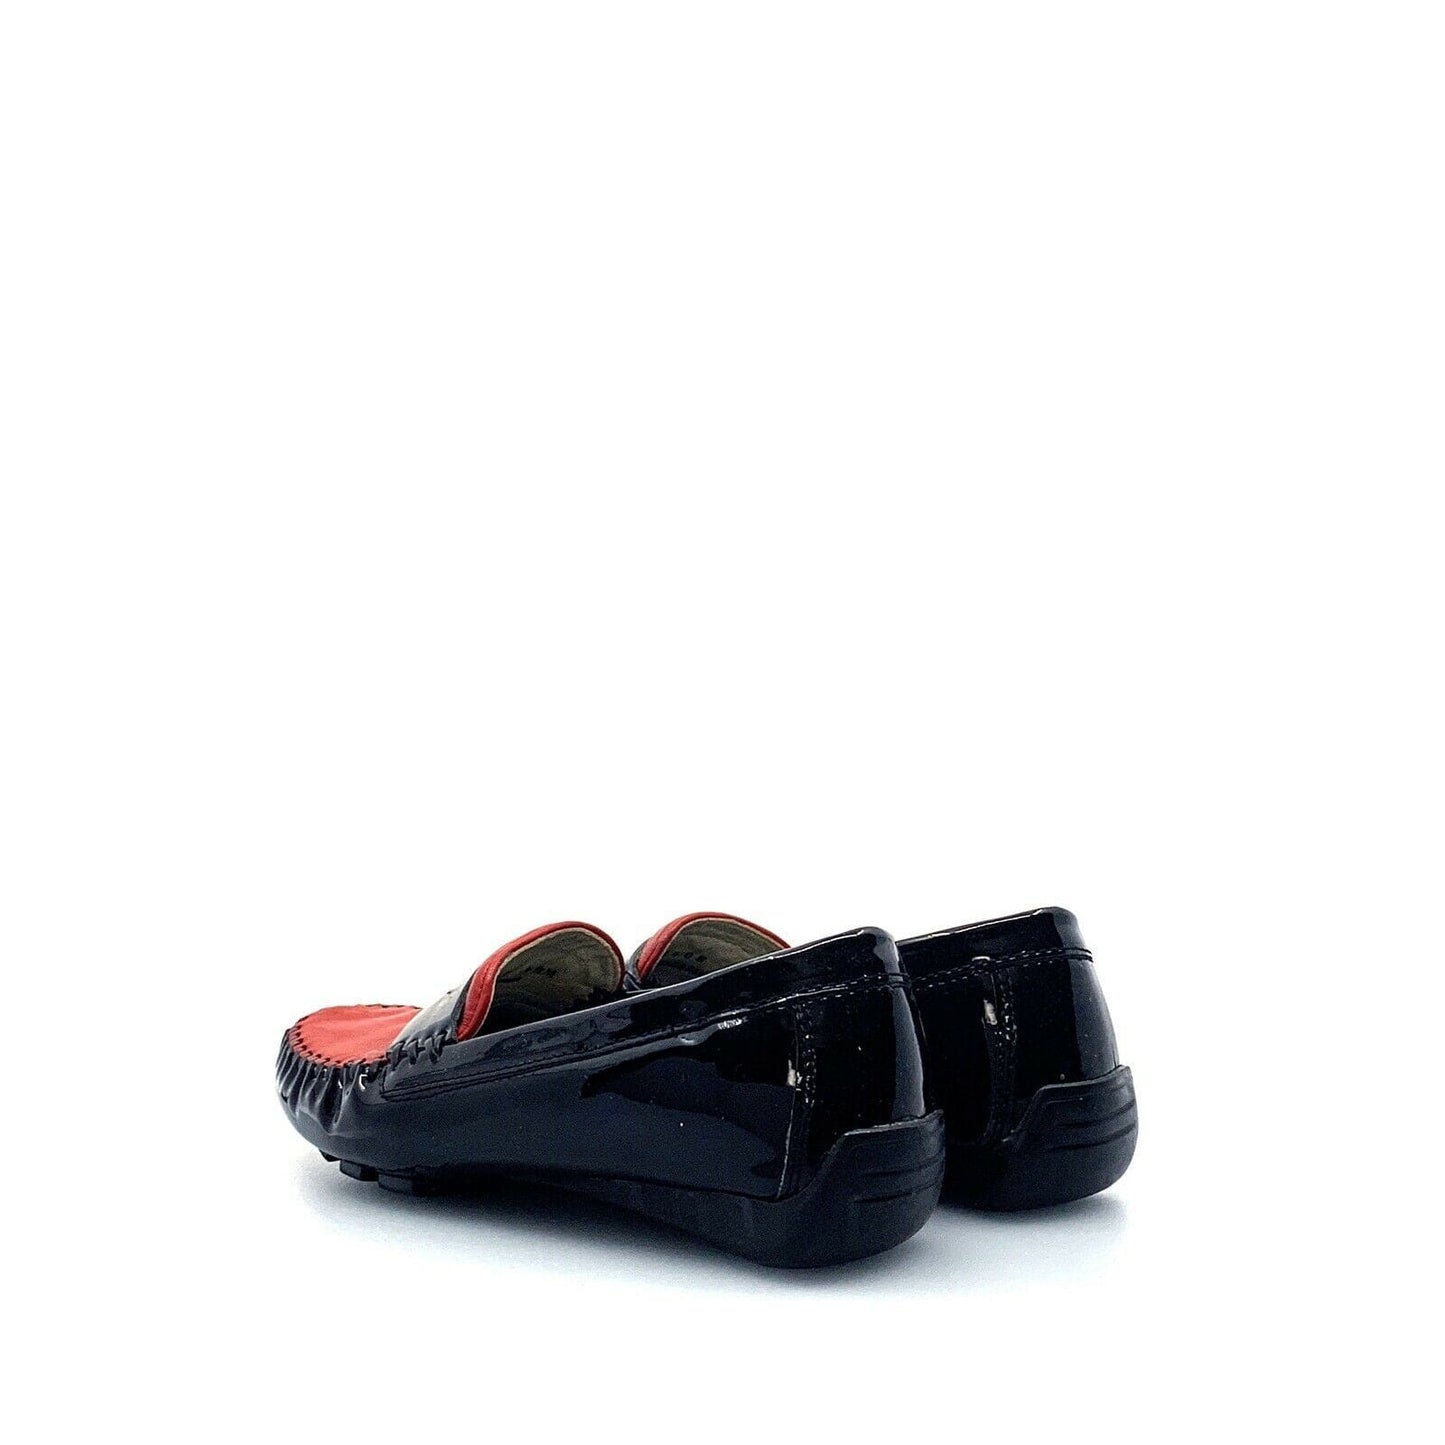 Robert Zur Womens Size 4.5M Black Red Moccasins Shoes Patent Leather Flats